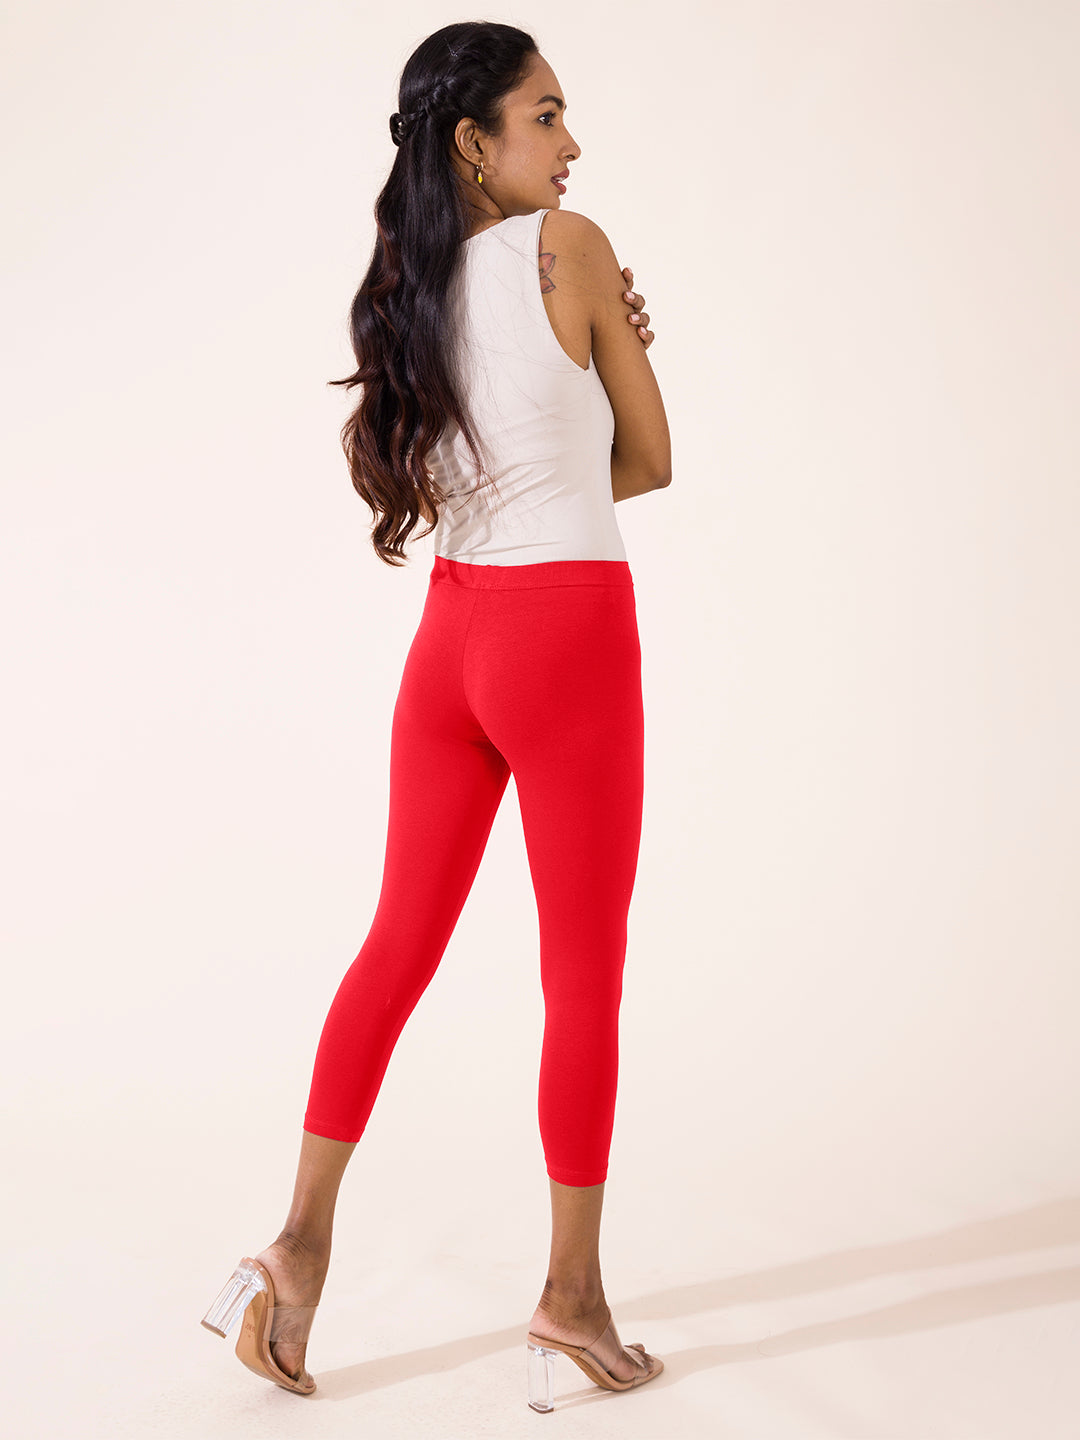 GO COLORS Nylon Ankle Length Legging (S, Black) in Coimbatore at best price  by Go Colour - Justdial